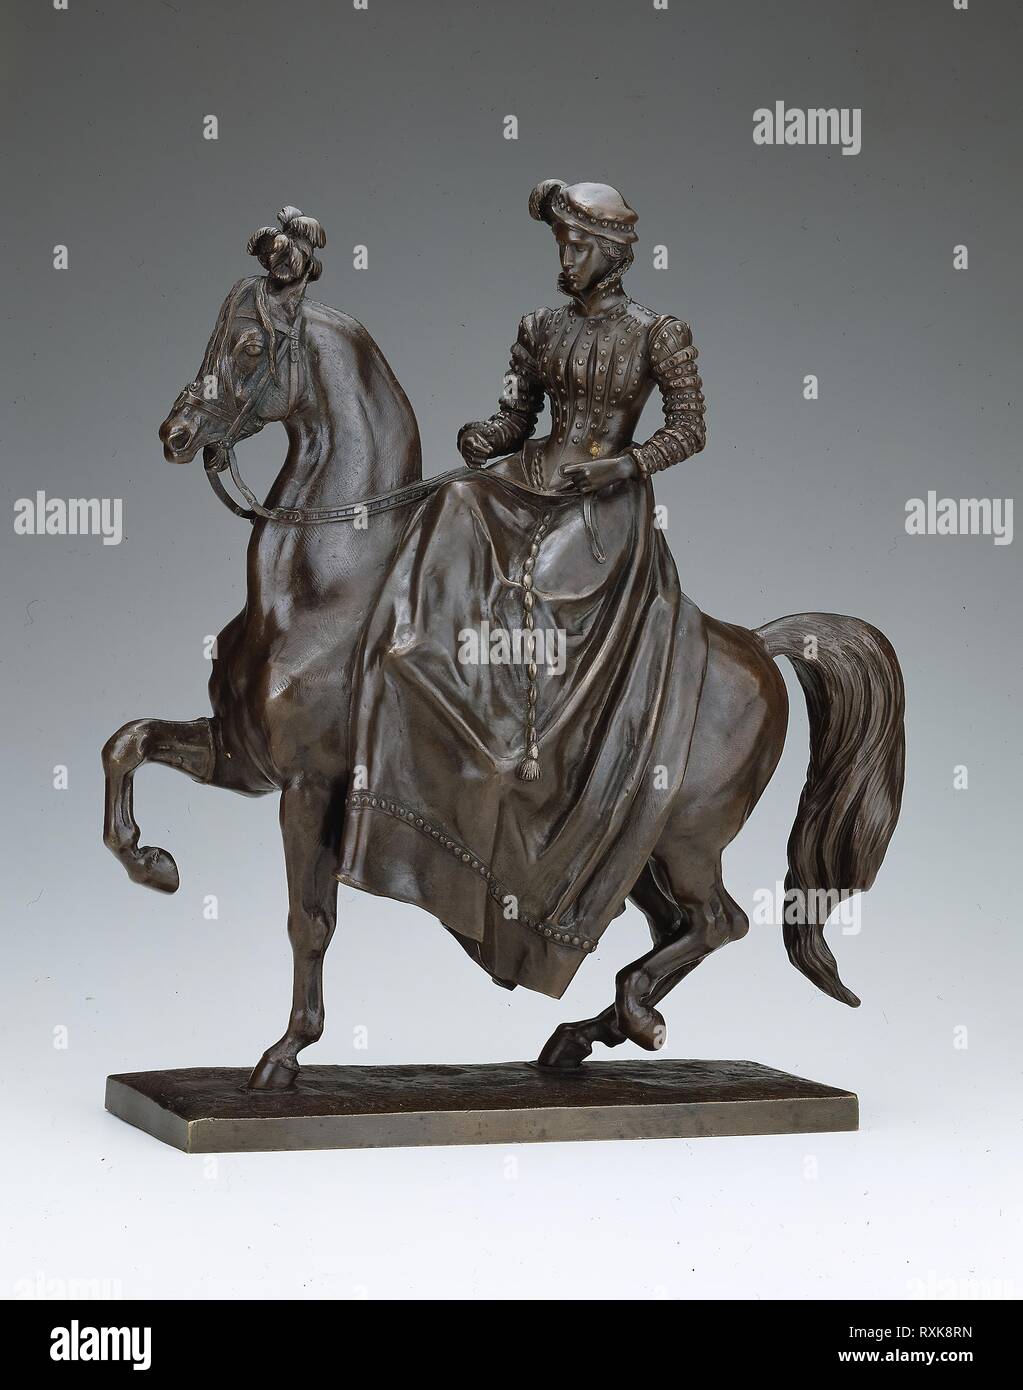 Equestrienne in Renaissance Dress. Antoine Louis Barye; French, 1795-1875. Date: 1835-1845. Dimensions: 39.4 × 36.5 × 13 cm (15 1/2 × 14 3/8 × 5 1/8 in.). Bronze. Origin: France. Museum: The Chicago Art Institute. Stock Photo